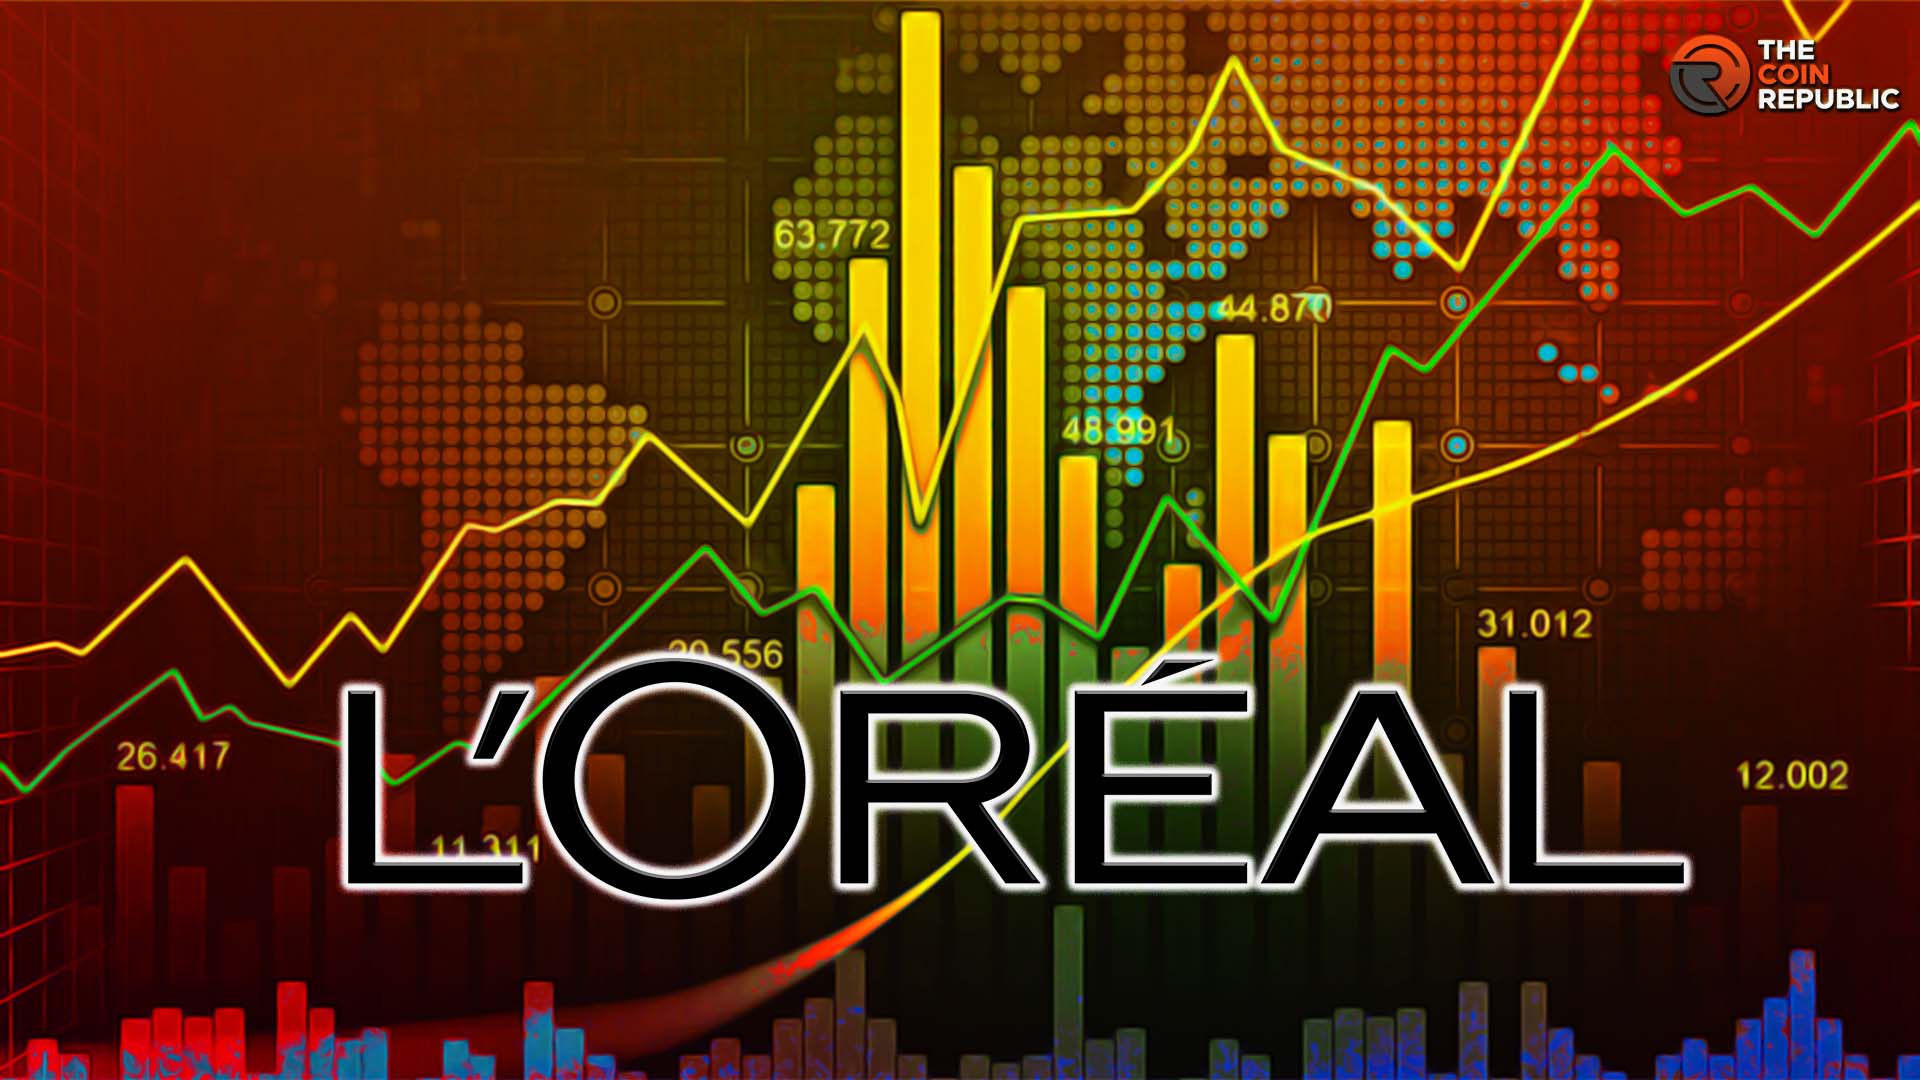 LOreal Stock Price Prediction: Can OR Stock Price Fall Soon?